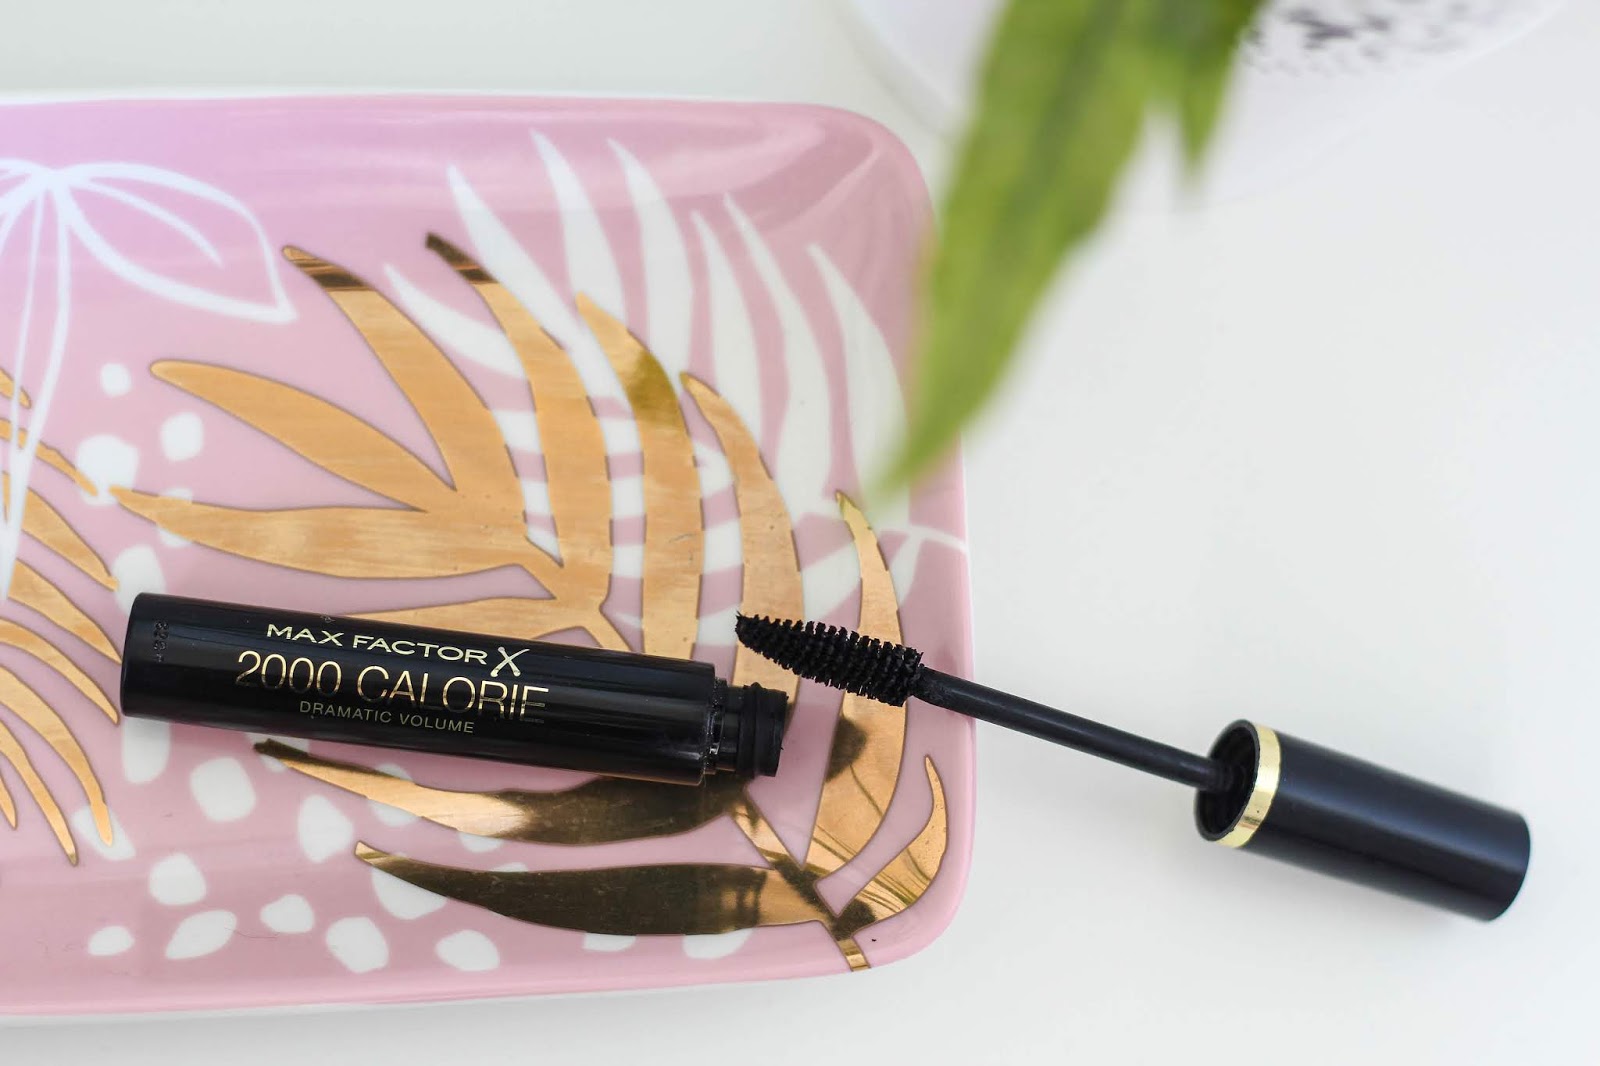 She's A Gentry: The Best but Most Underrated Mascara- 2000 Calorie Mascara